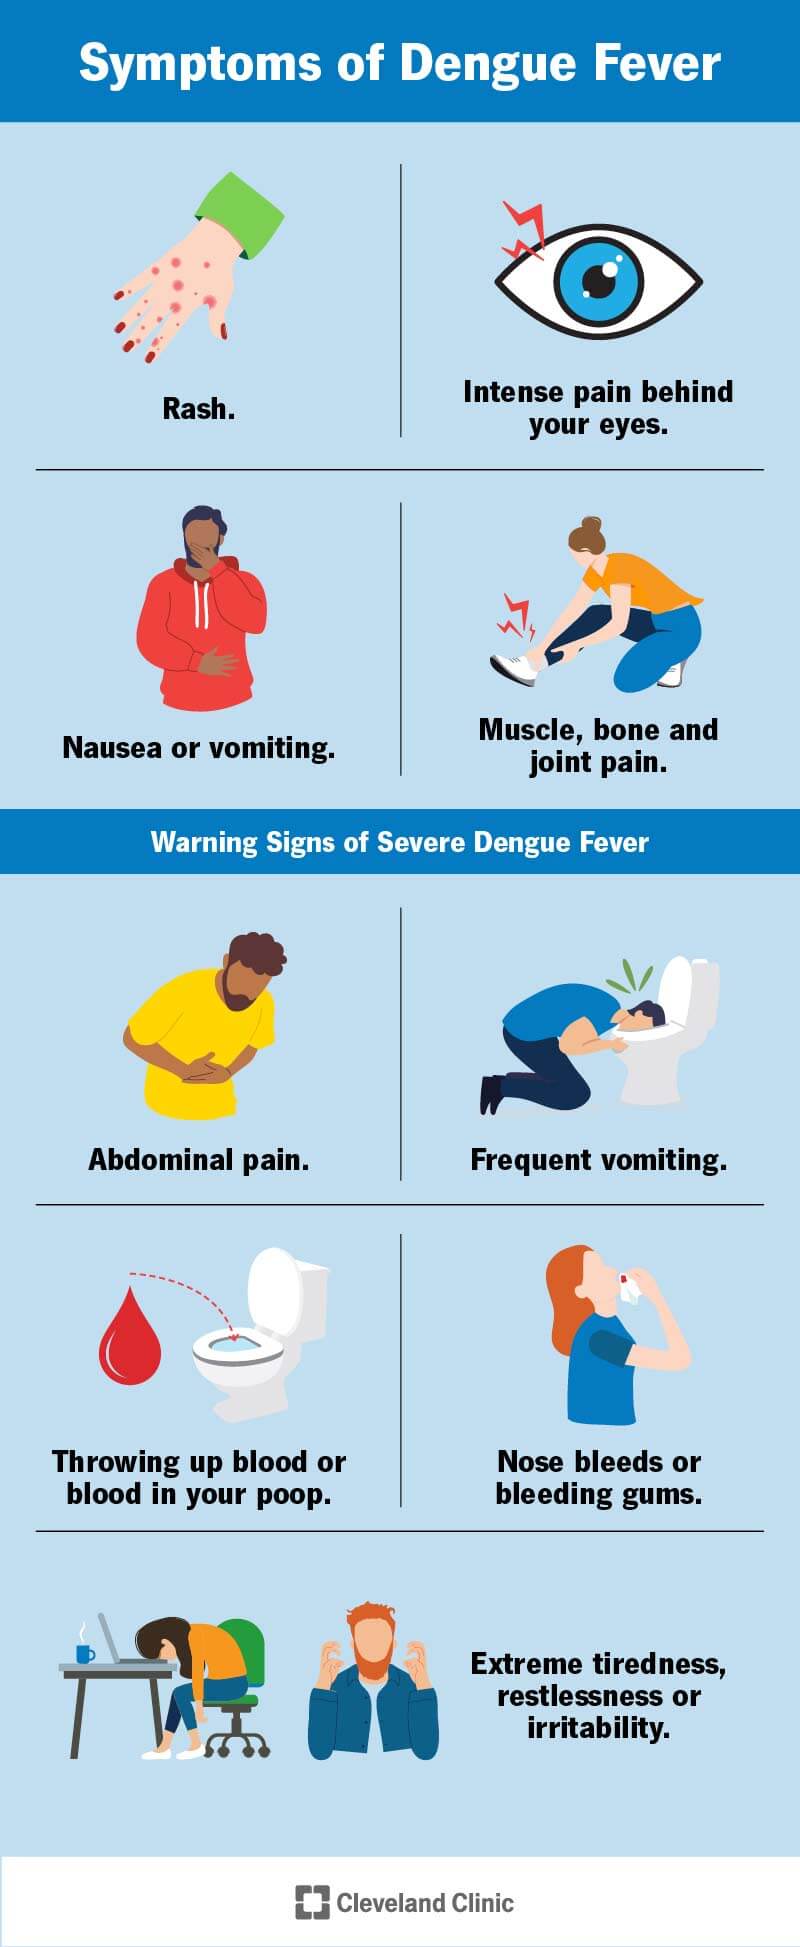 Symptoms of dengue are rash, eye pain, nausea or vomiting and muscle pain. Severe signs are blood in vomit or poop, abdominal pain and more.